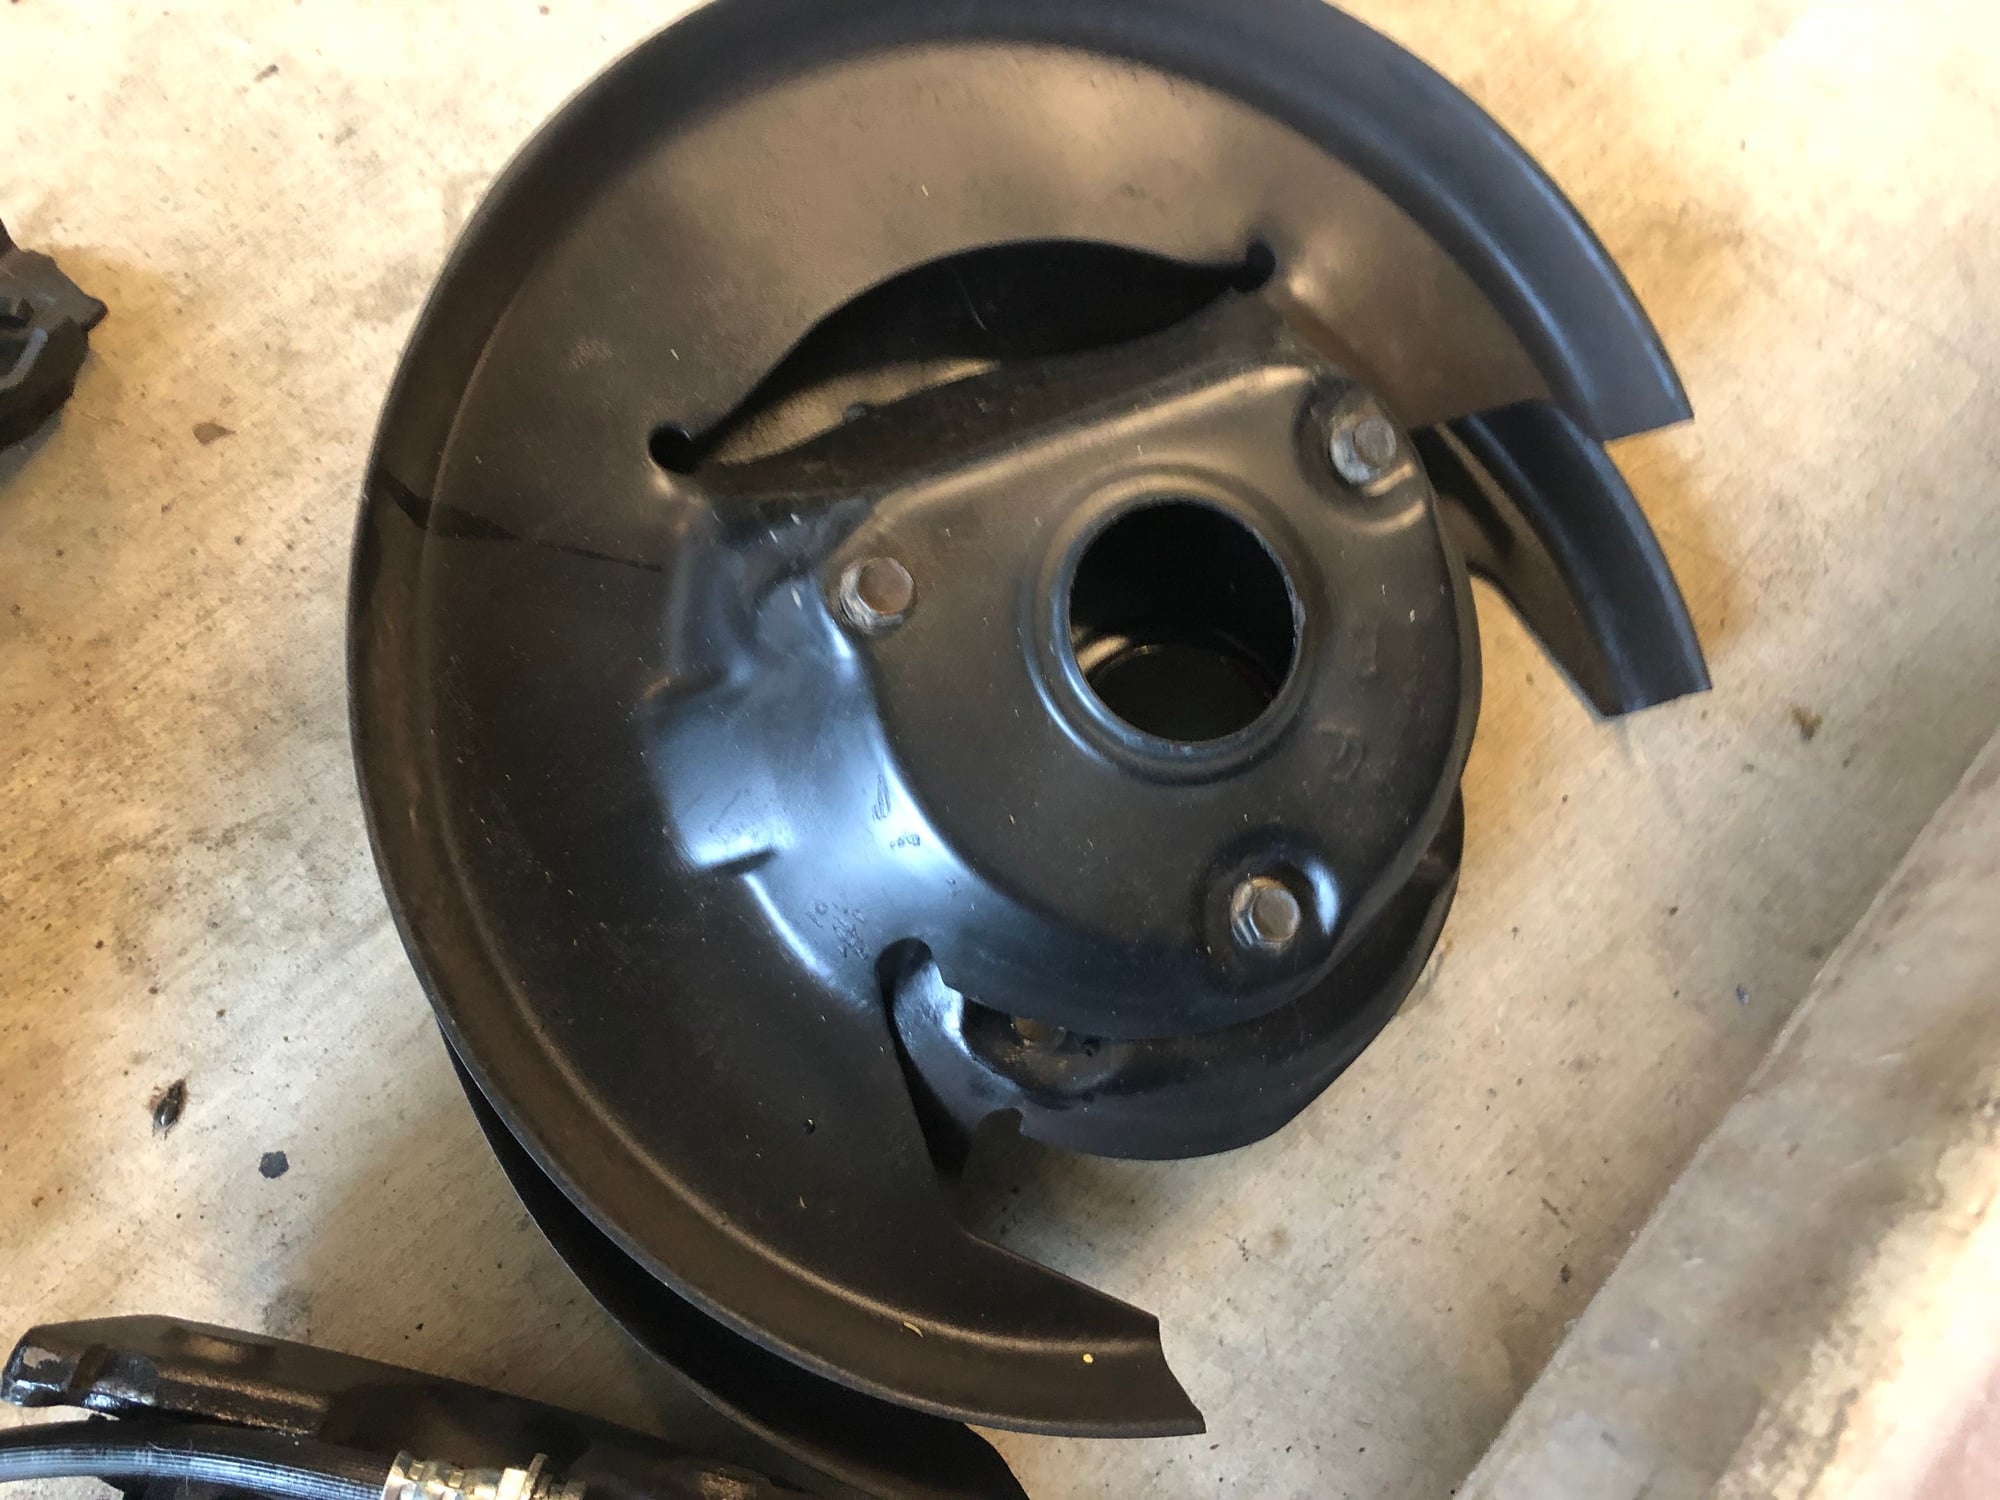 Brakes - 79 f150 front disc brakes - Used - 1962 to 1979 Ford F-150 - Moody, TX 76557, United States